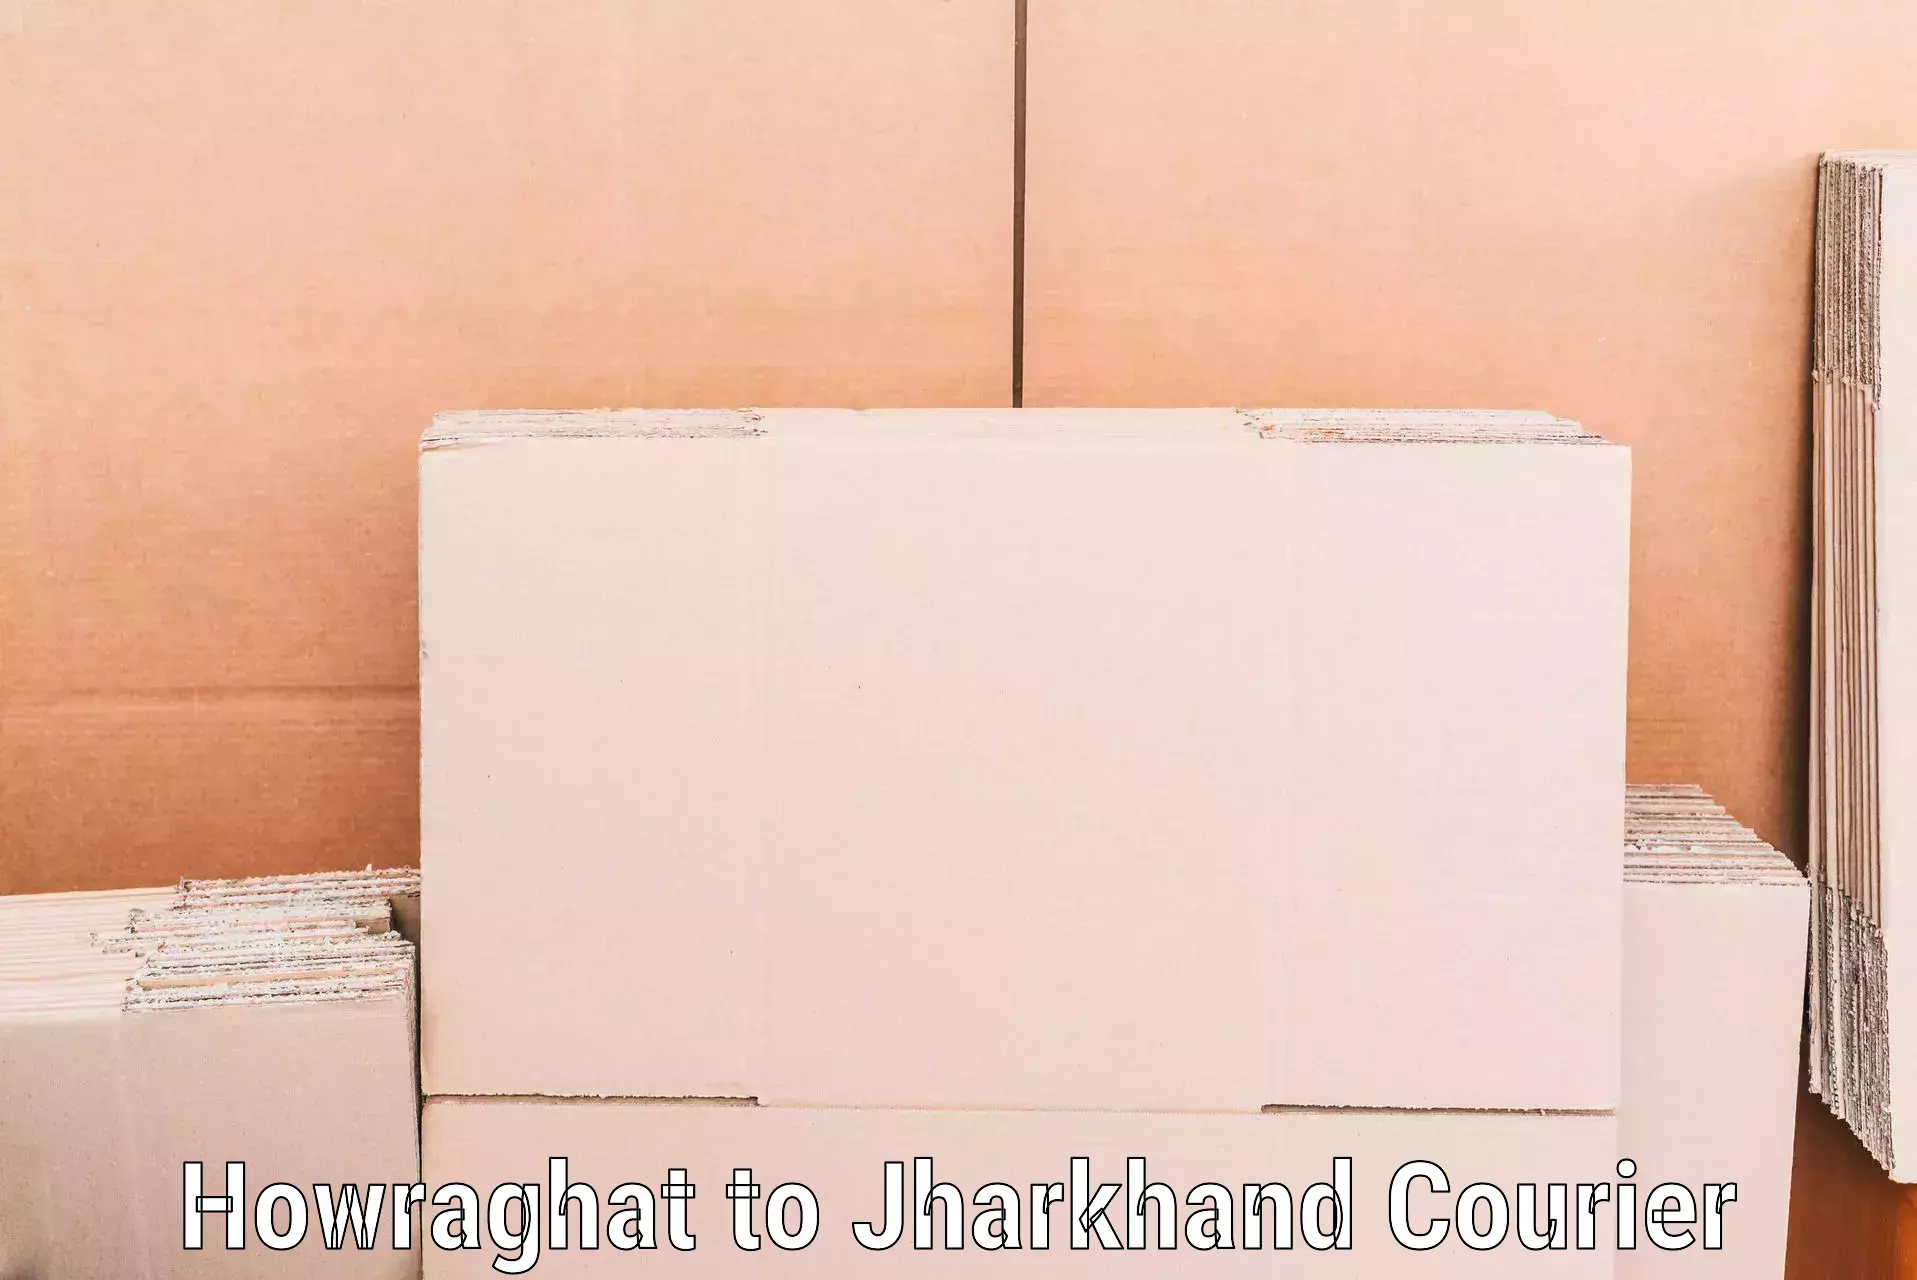 Efficient moving services in Howraghat to Shikaripara